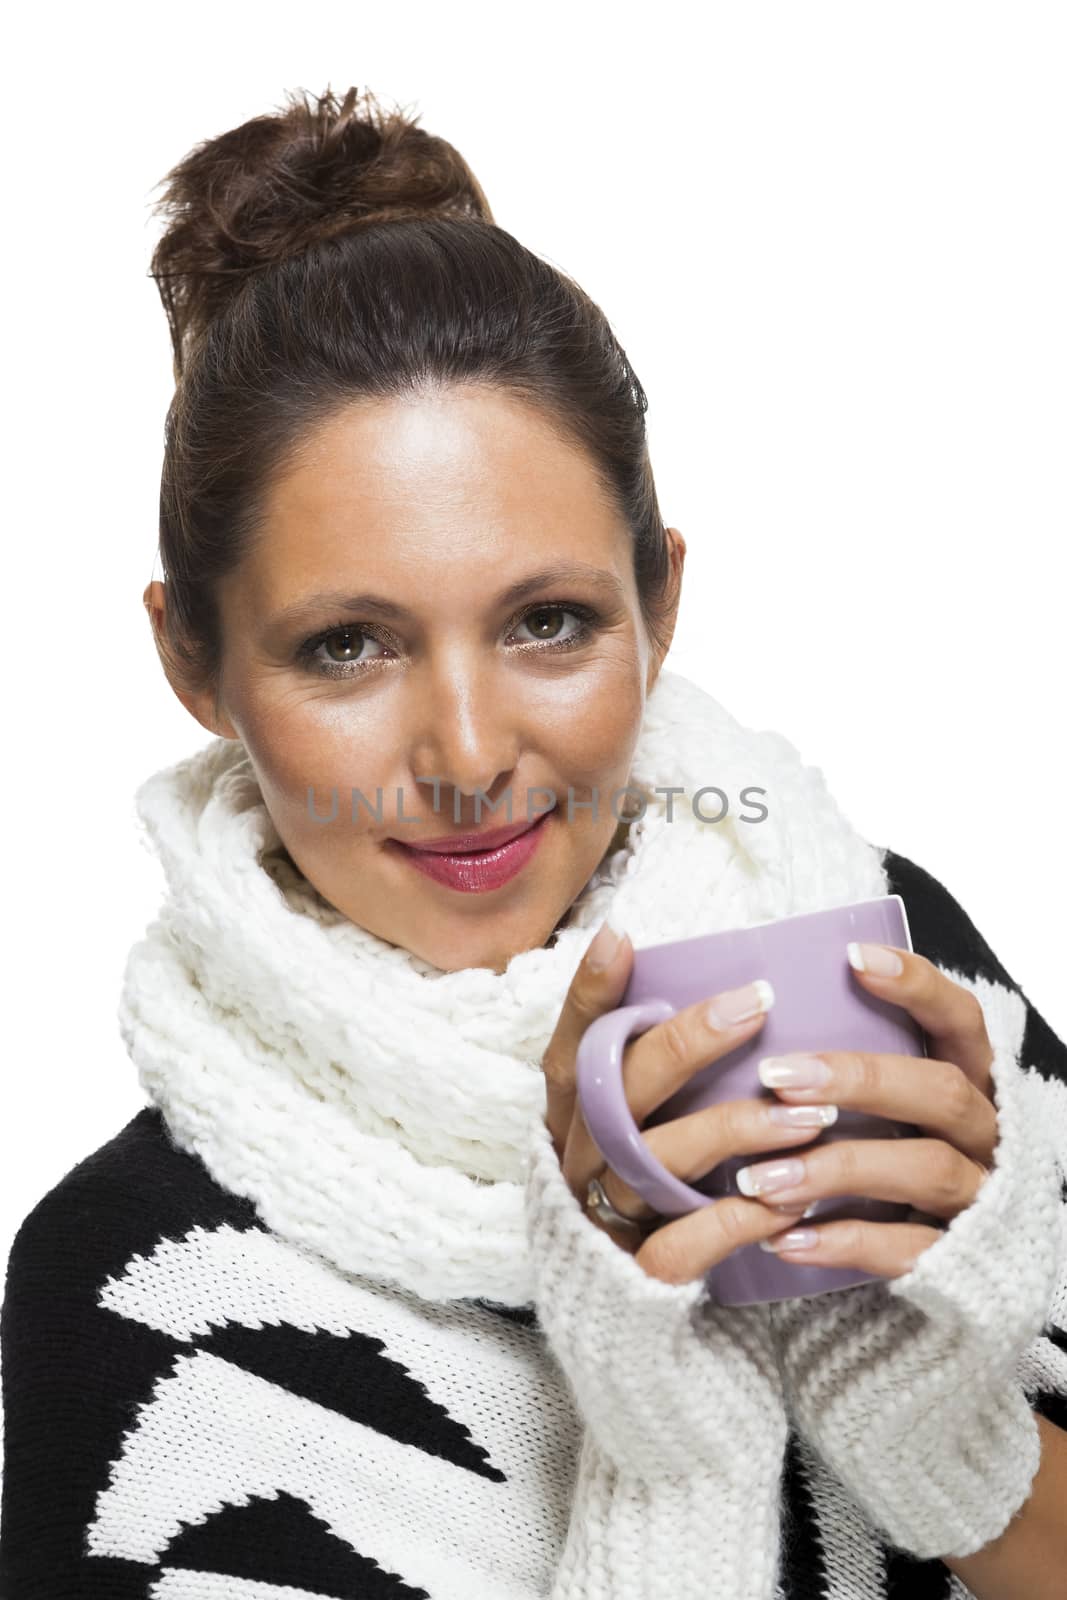 Cold attractive stylish woman in an elegant black and white winter outfit clasping a mug of hot coffee in her hands while savoring the aroma with a look of anticipation